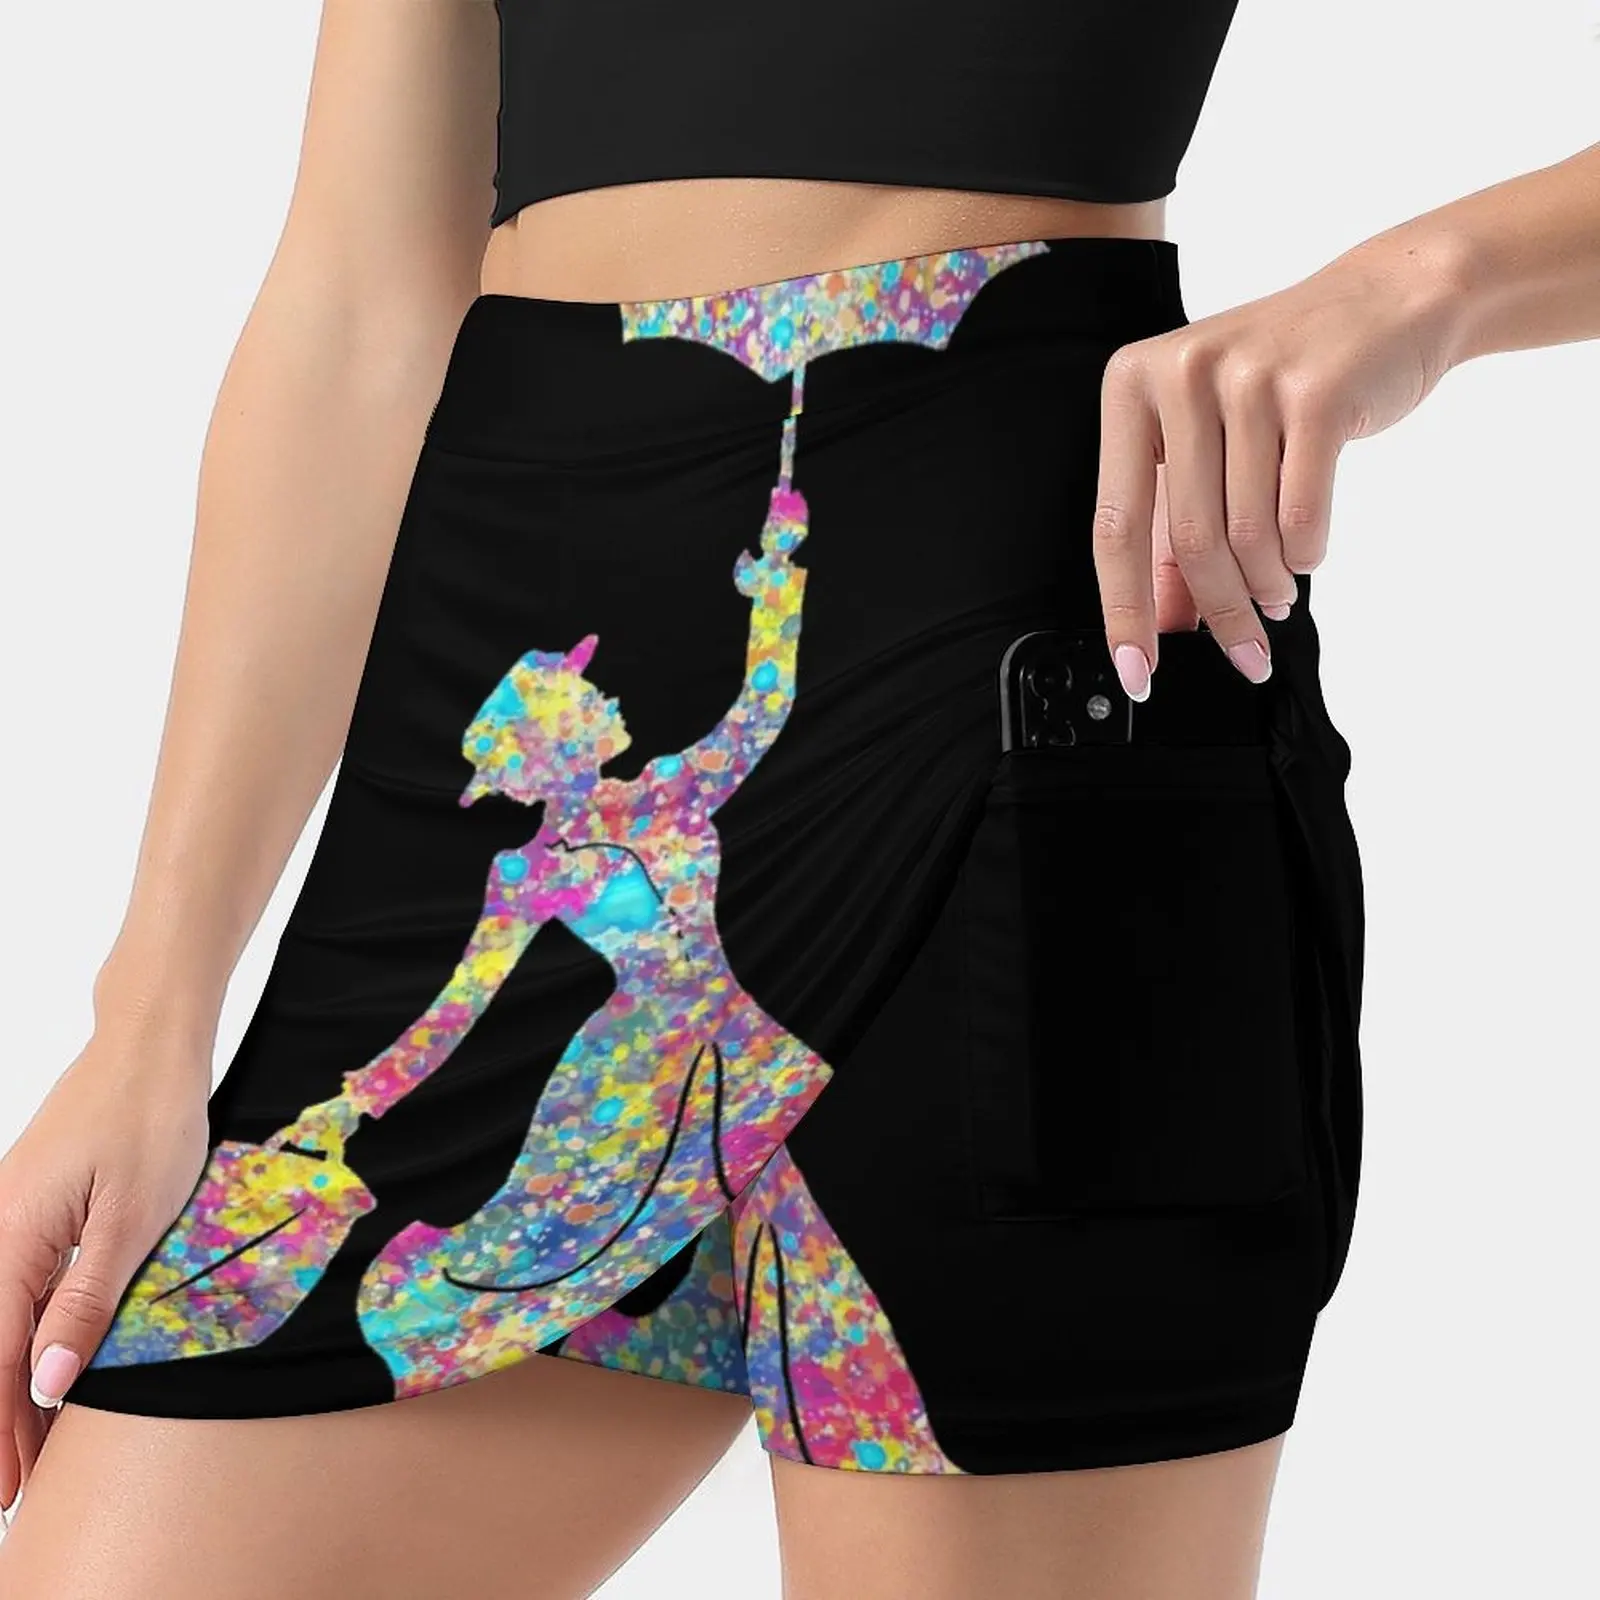 

Mary Poppins-The Magical Nanny Women's skirt Mini Skirts A Line Skirt With Hide Pocket Mary Poppins Movie Tv Film Fantasy